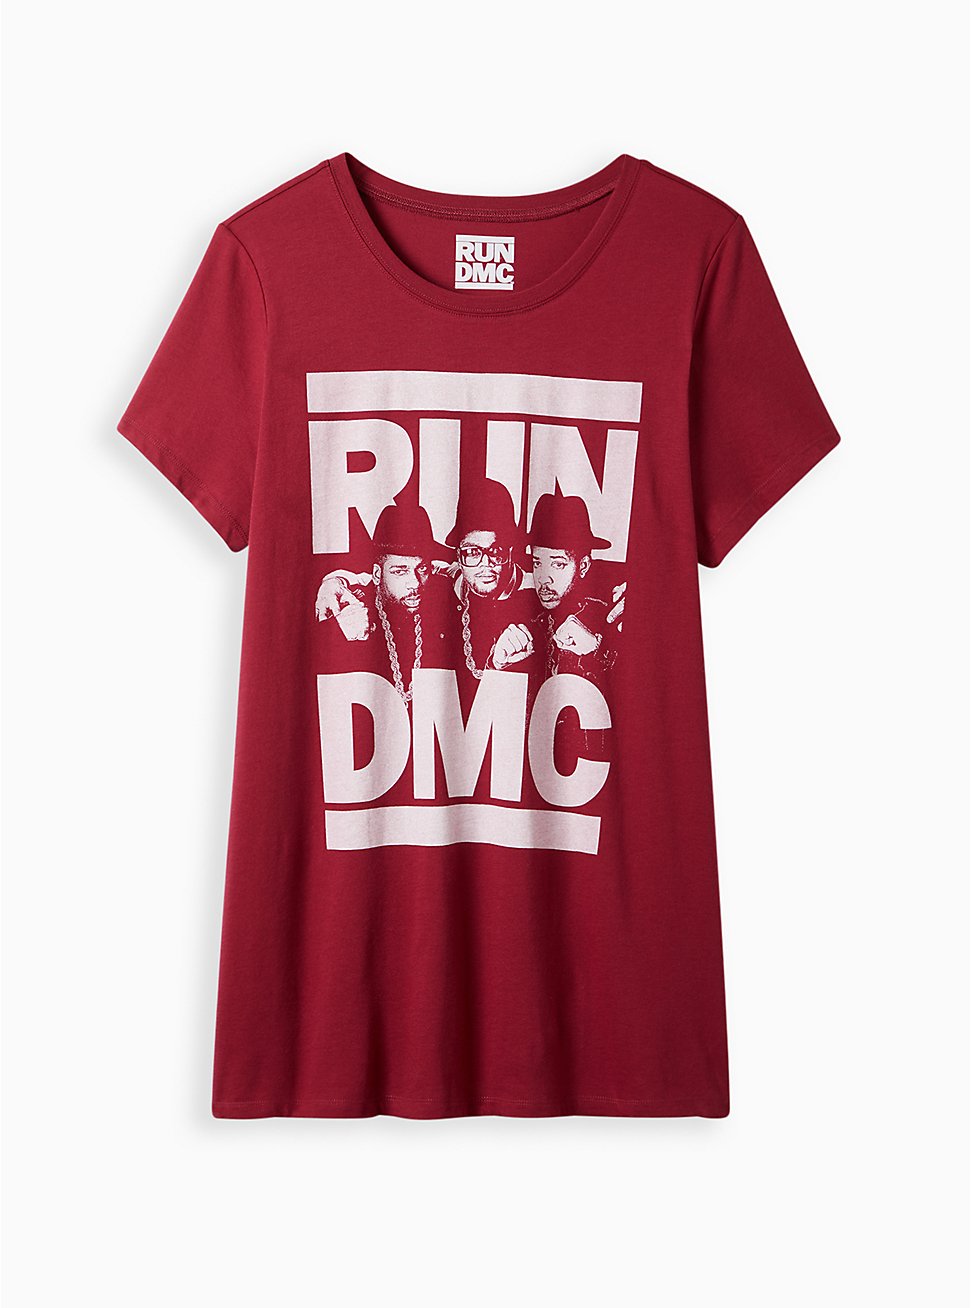 Plus Size Classic Fit Tunic Tee - Run DMC Red, RED, hi-res